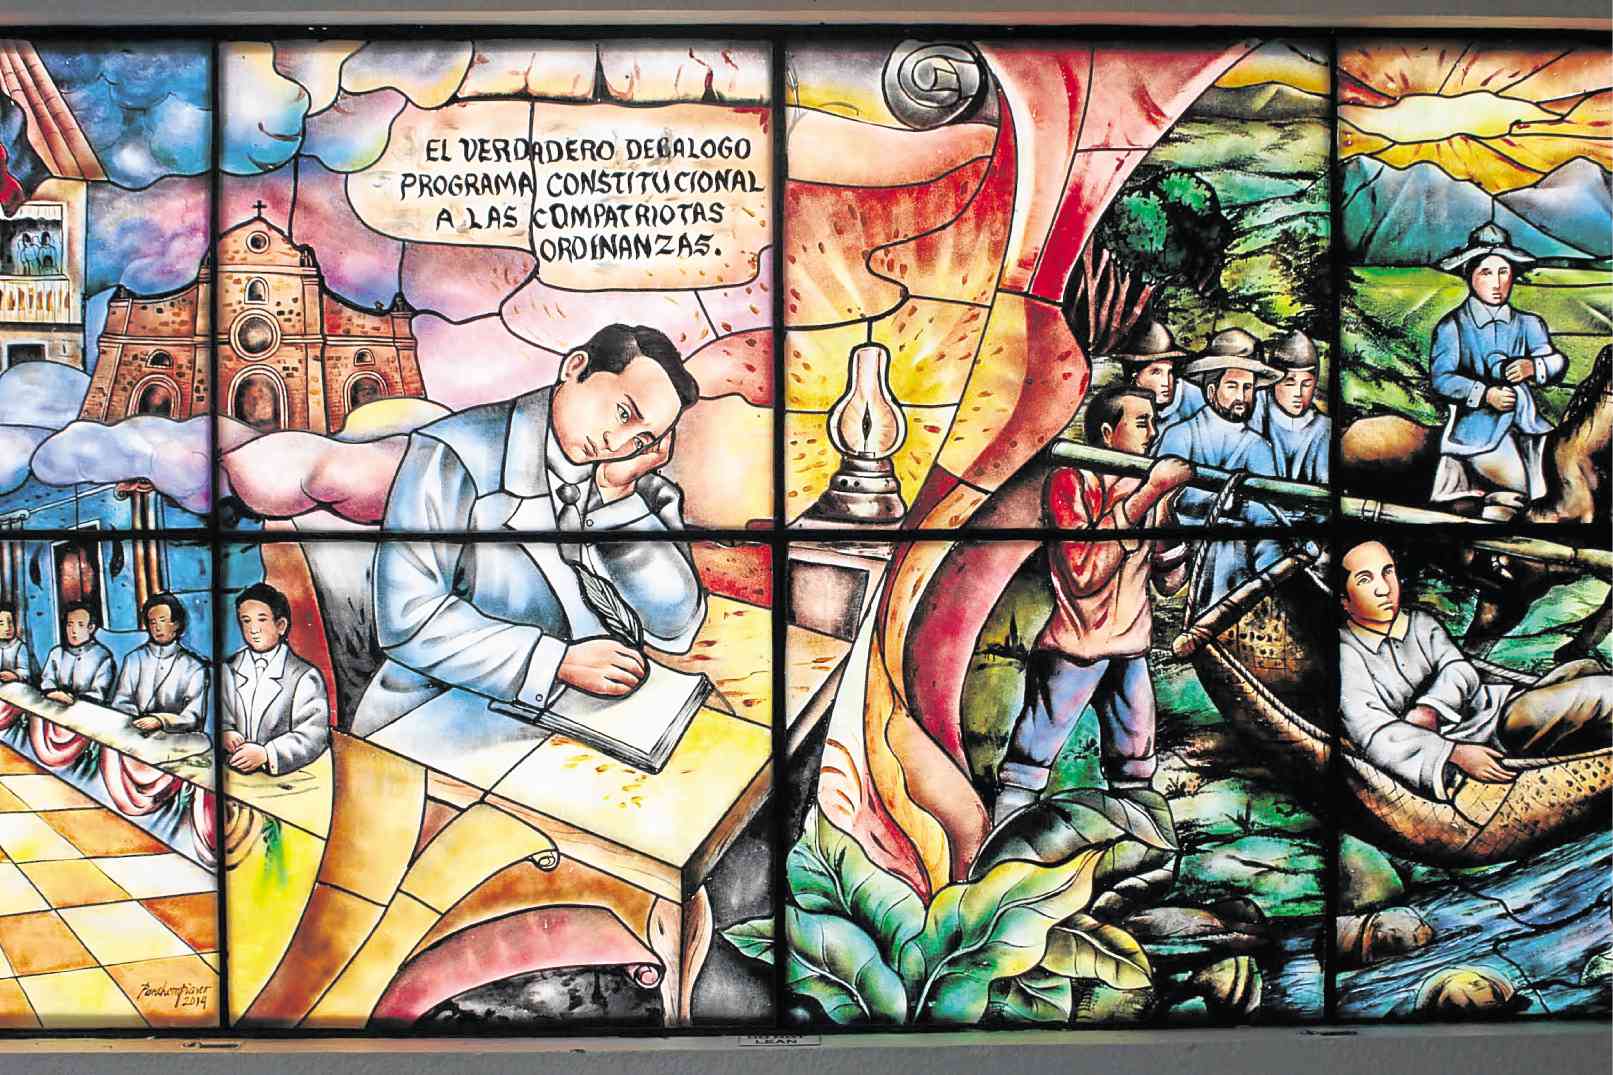 What was the contribution of Apolinario Mabini?